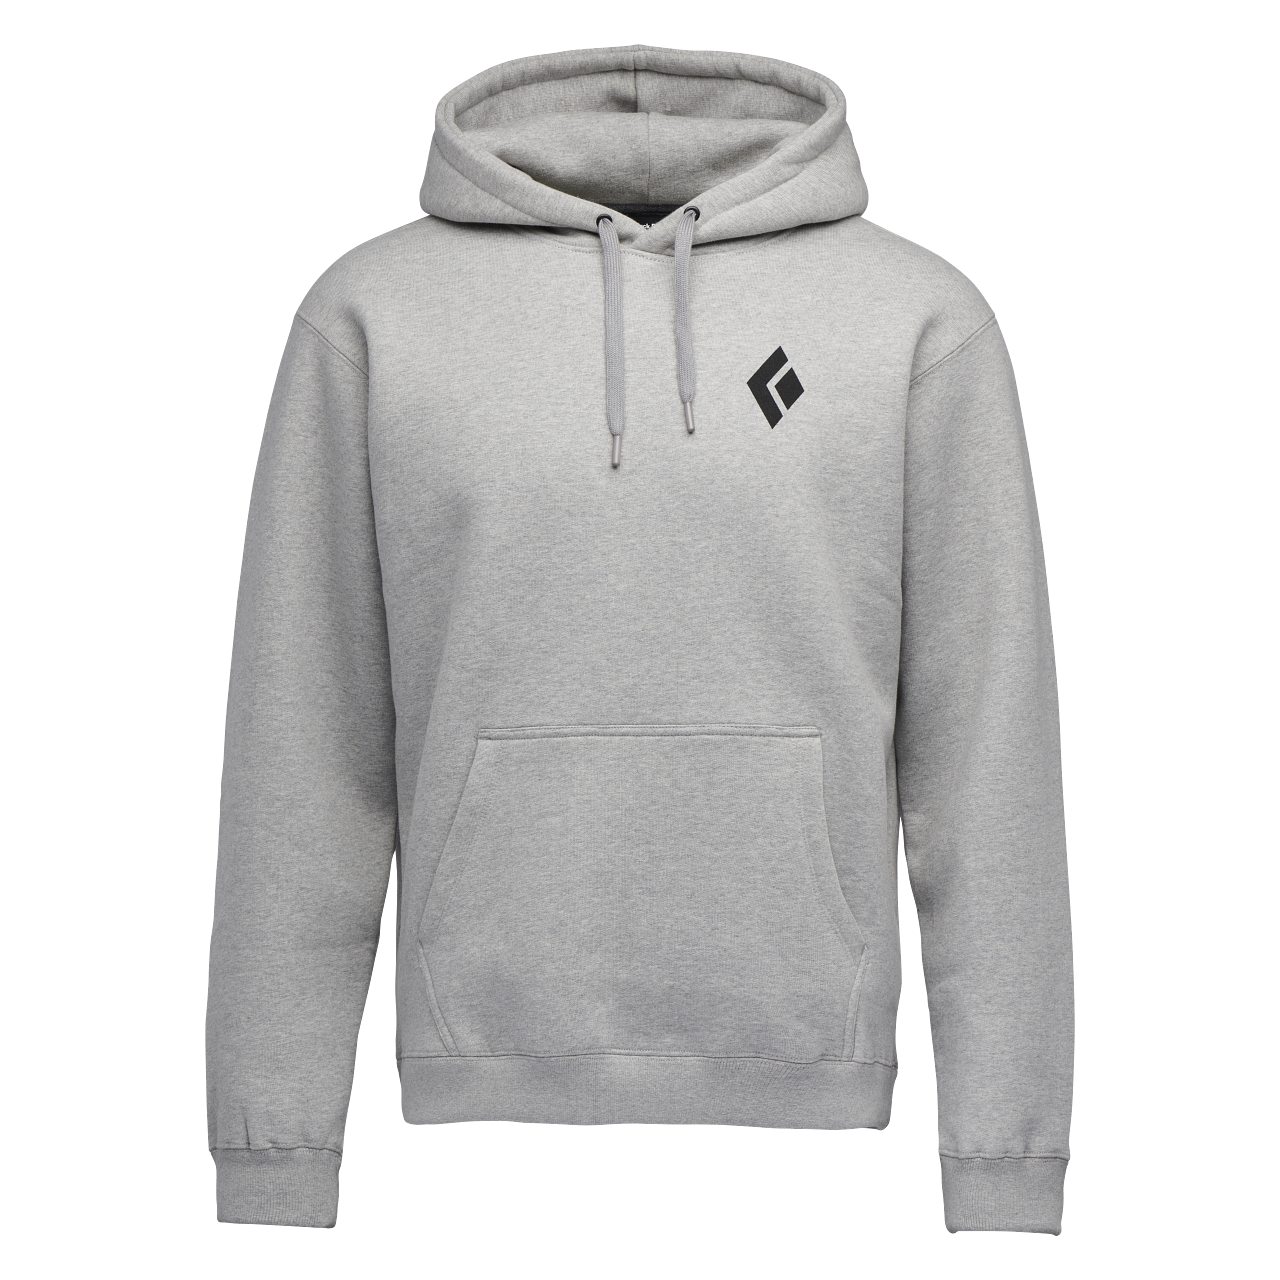 Black Diamond Equipment For Alpinists Pullover Hoody - Men's in grey